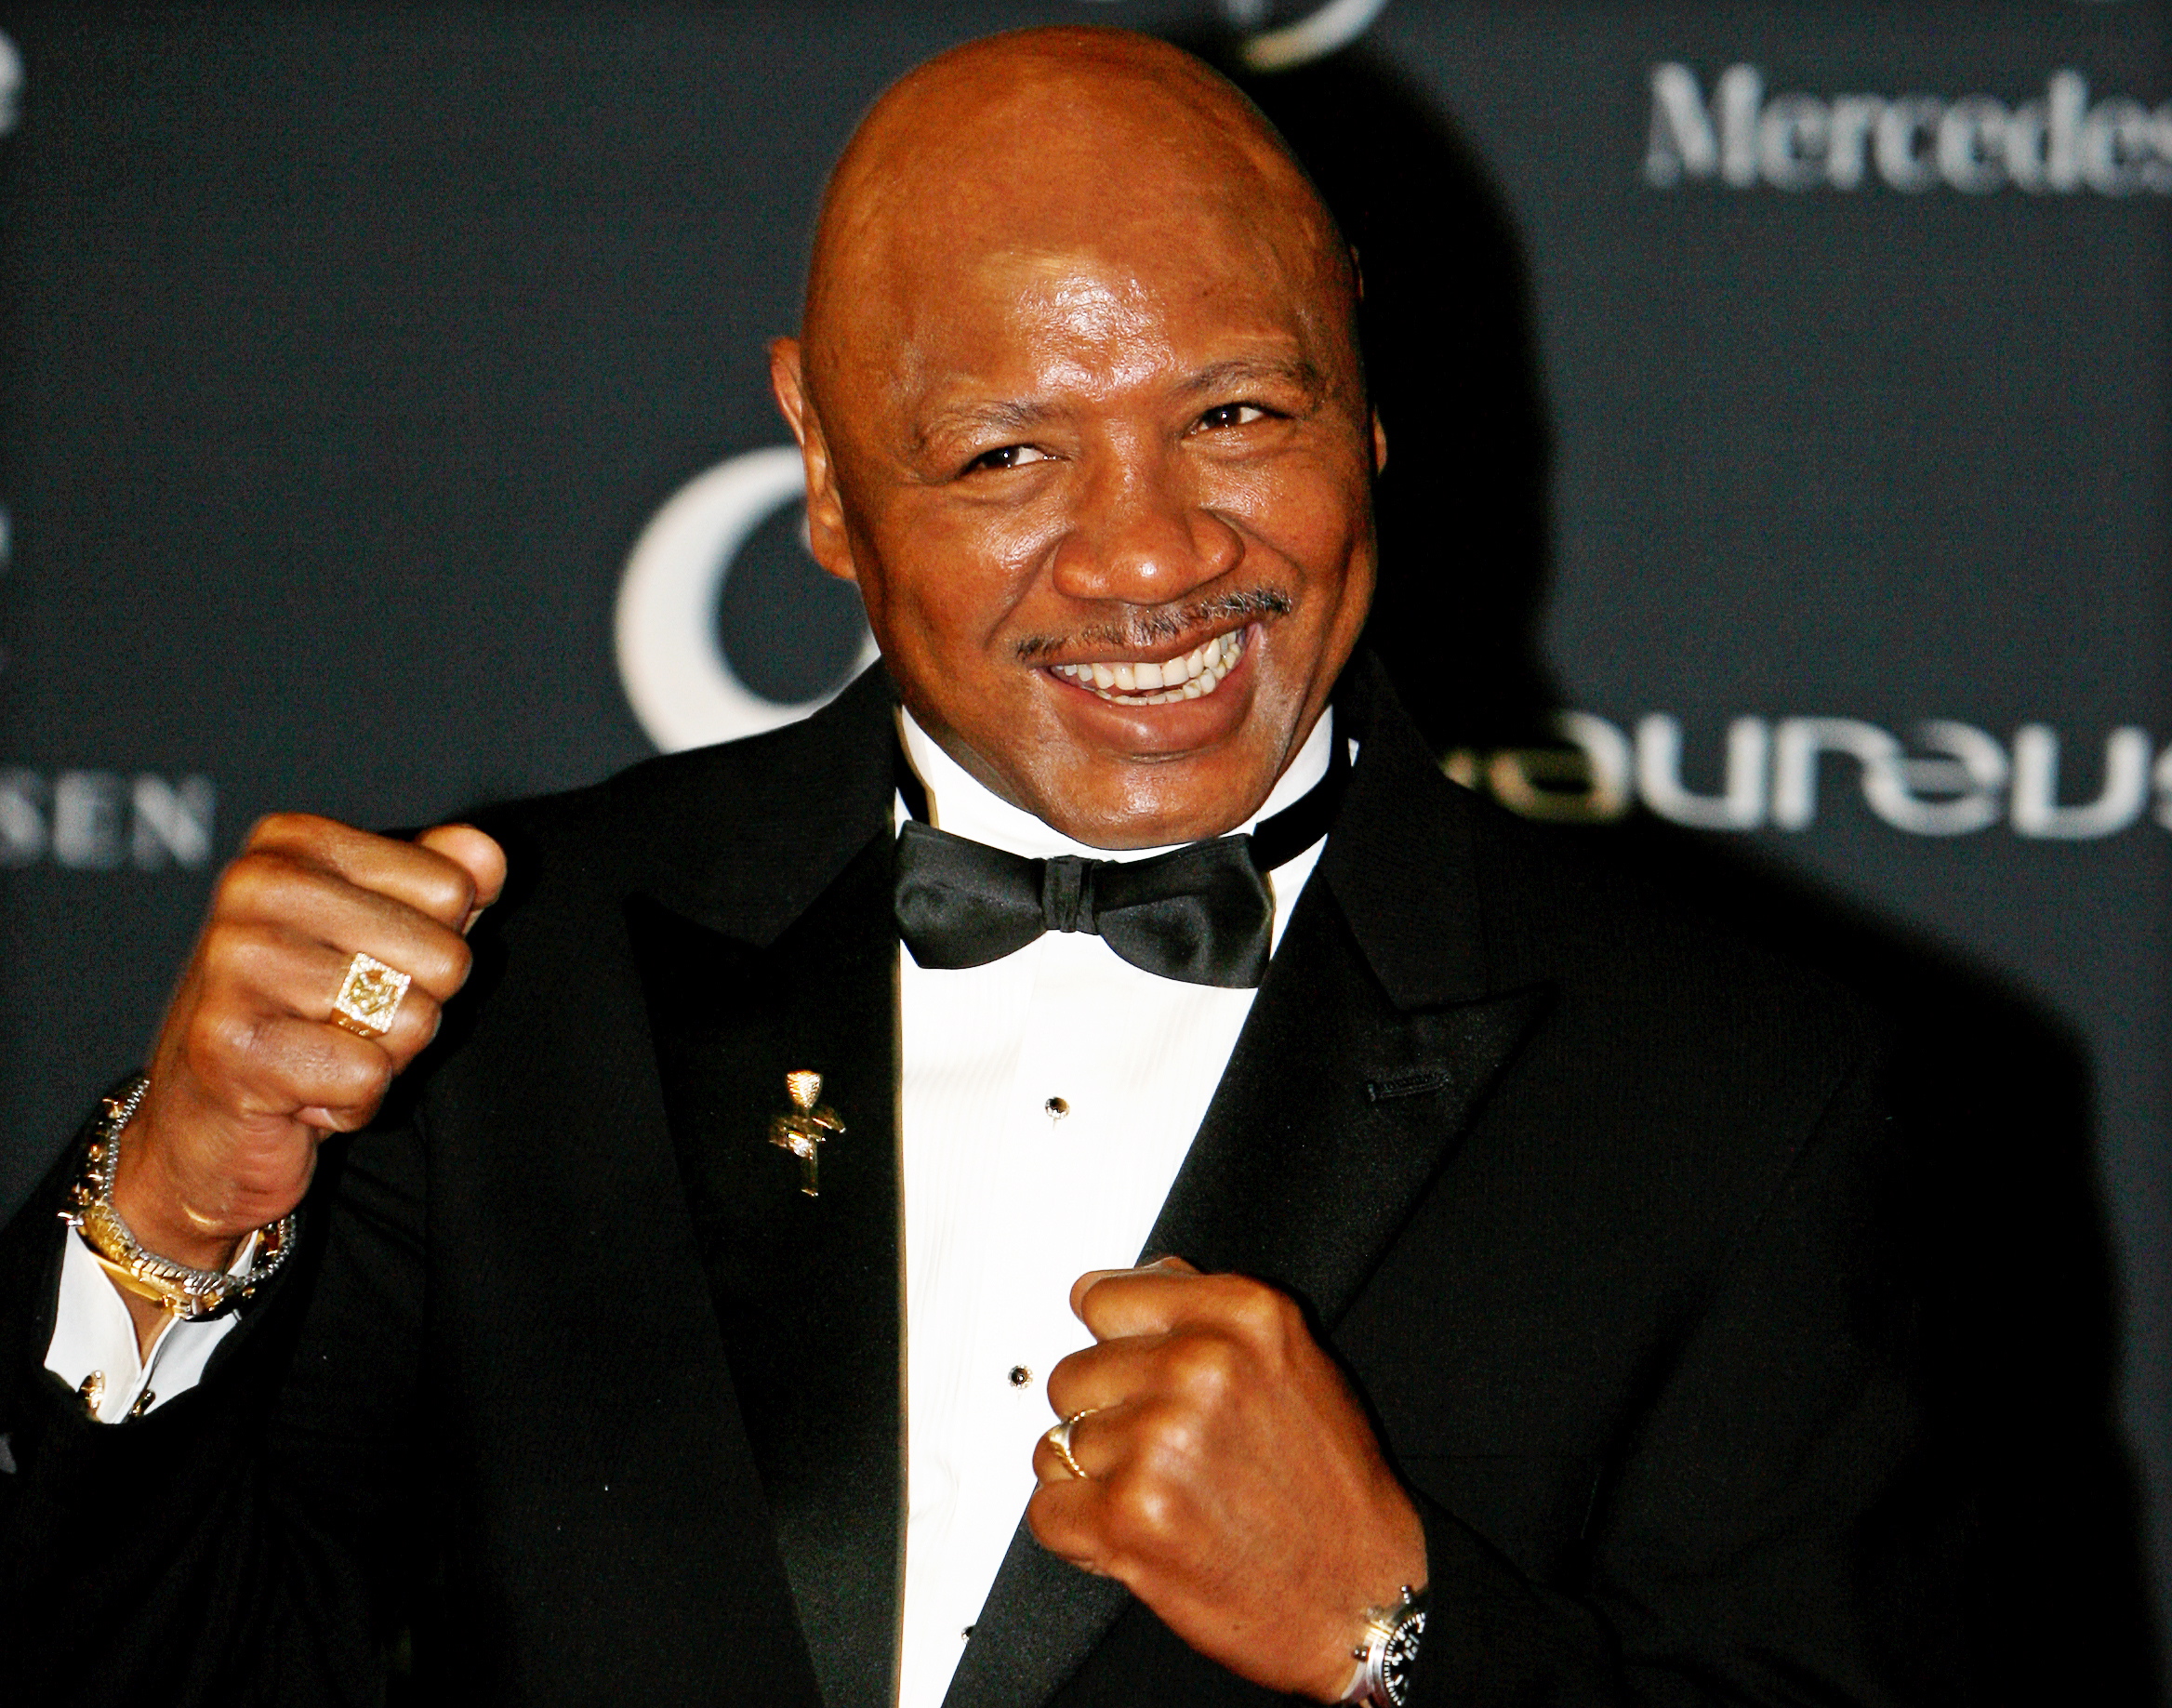 epa09073171 (FILE) - Former US boxing champion Marvelous Marvin Hagler arrives on the red carpet at the Laureus World Sports Awards in Abu Dhabi, United Arab Emirates, 07 February 2011 (reissued 14 March 2021). The middleweight boxing legend passed away aged 66 in his home in New Hampshire on 13 March 2021, his wife announced.  EPA/SONZA GABRIEL